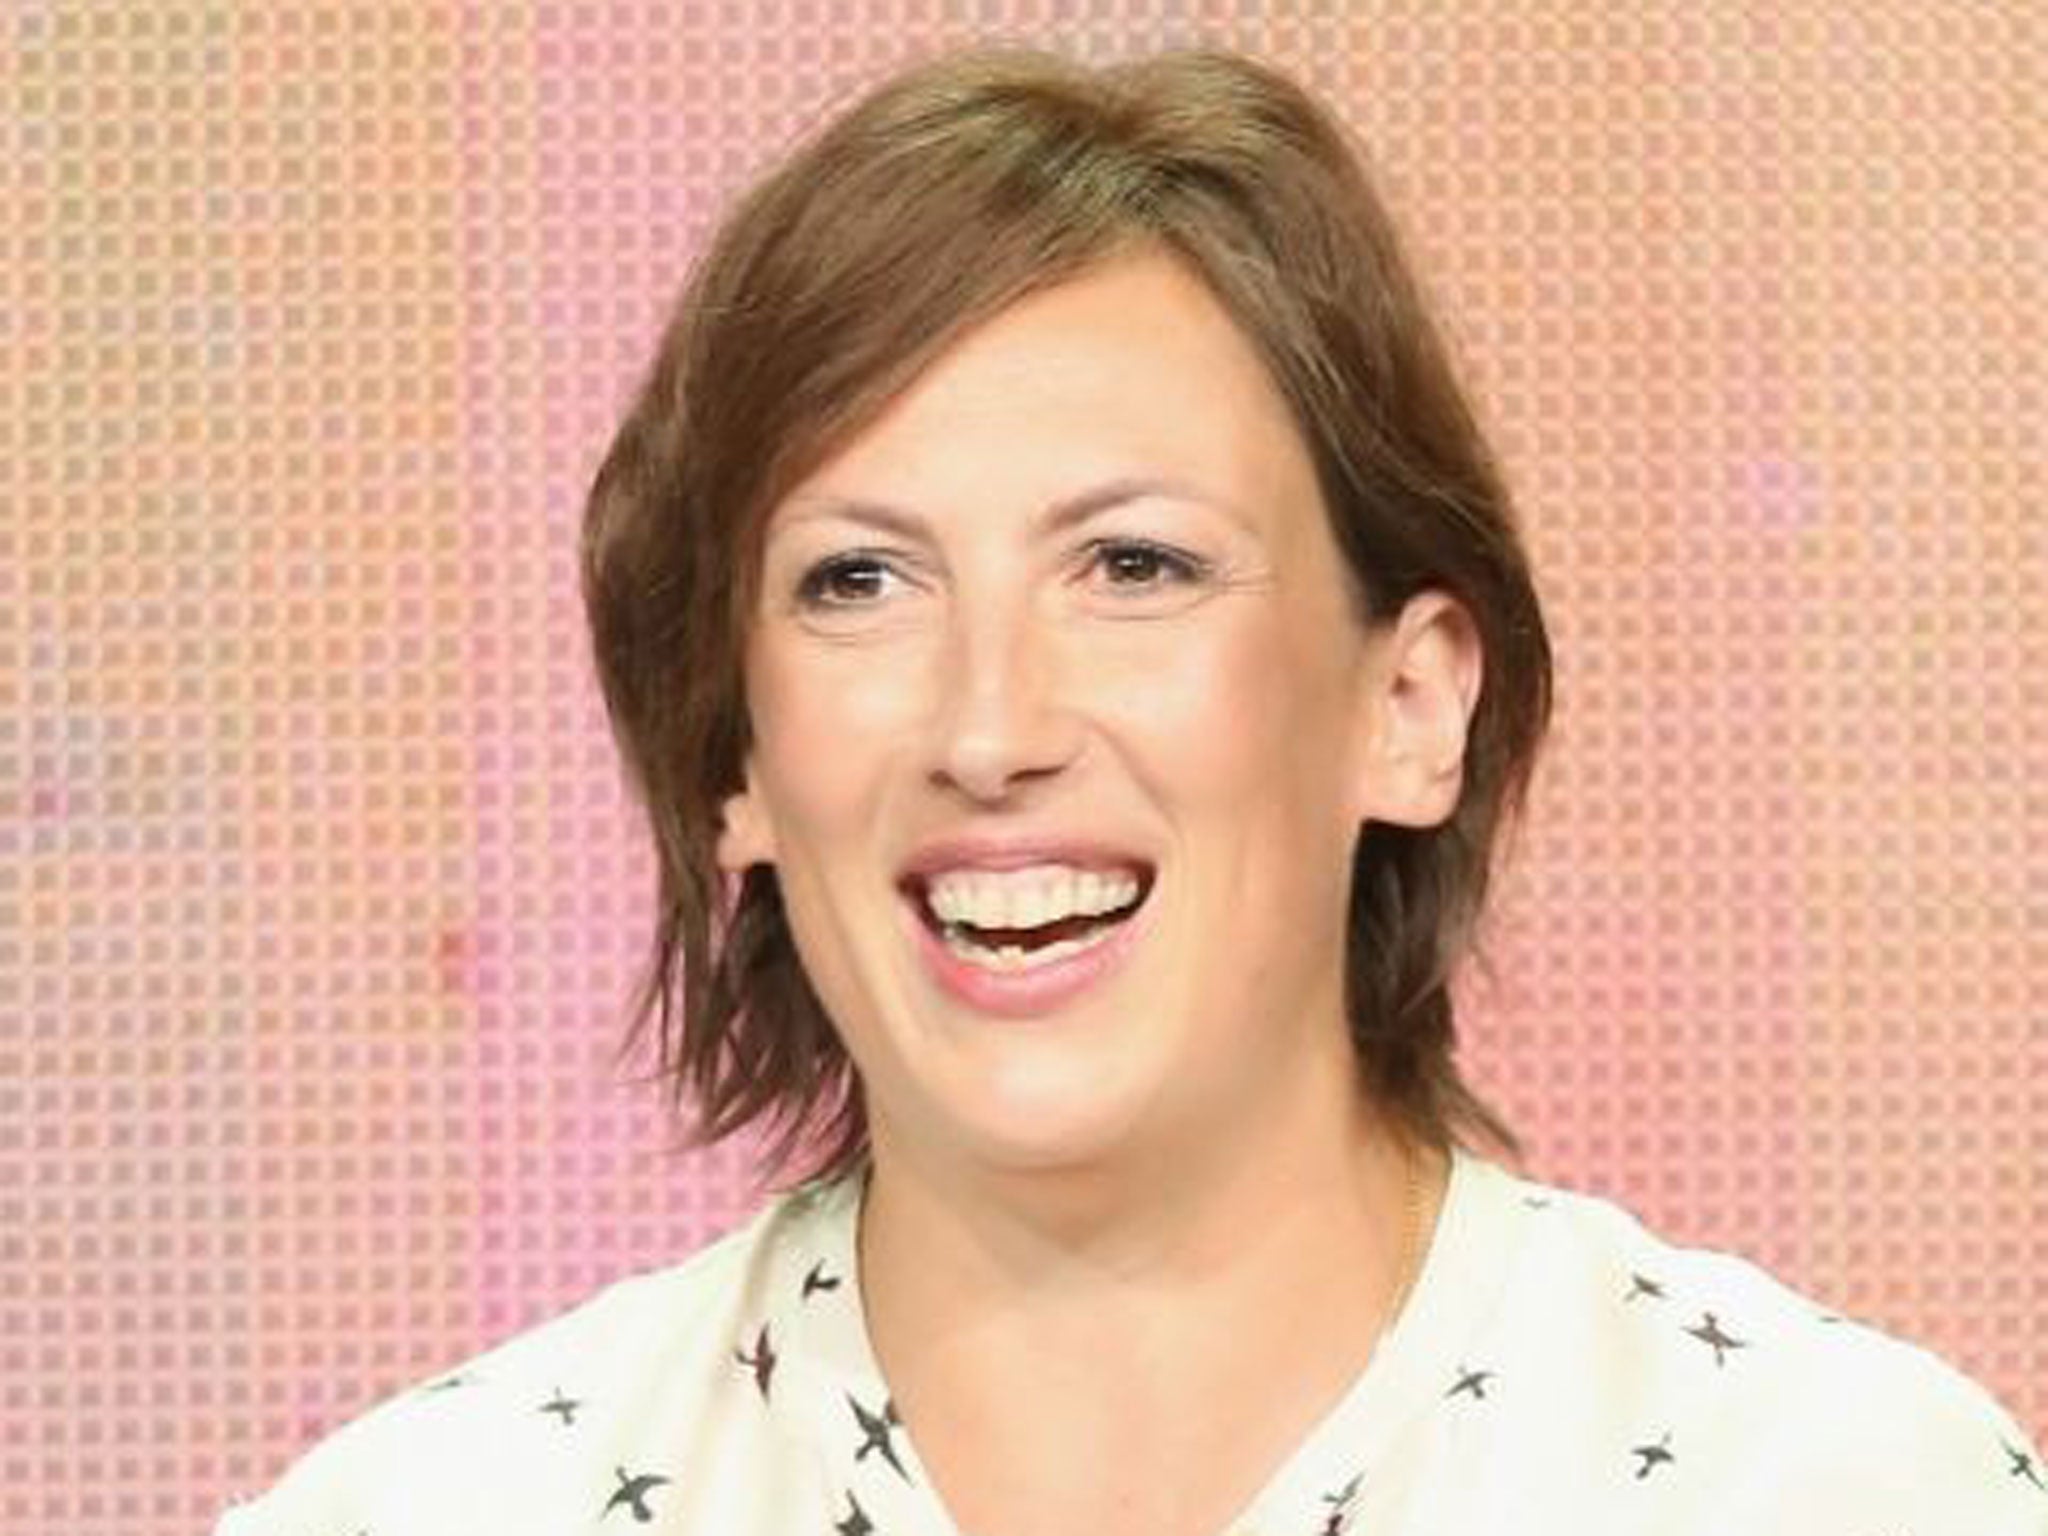 Miranda Hart says she only developed problems with how she looked after she left school and went to university